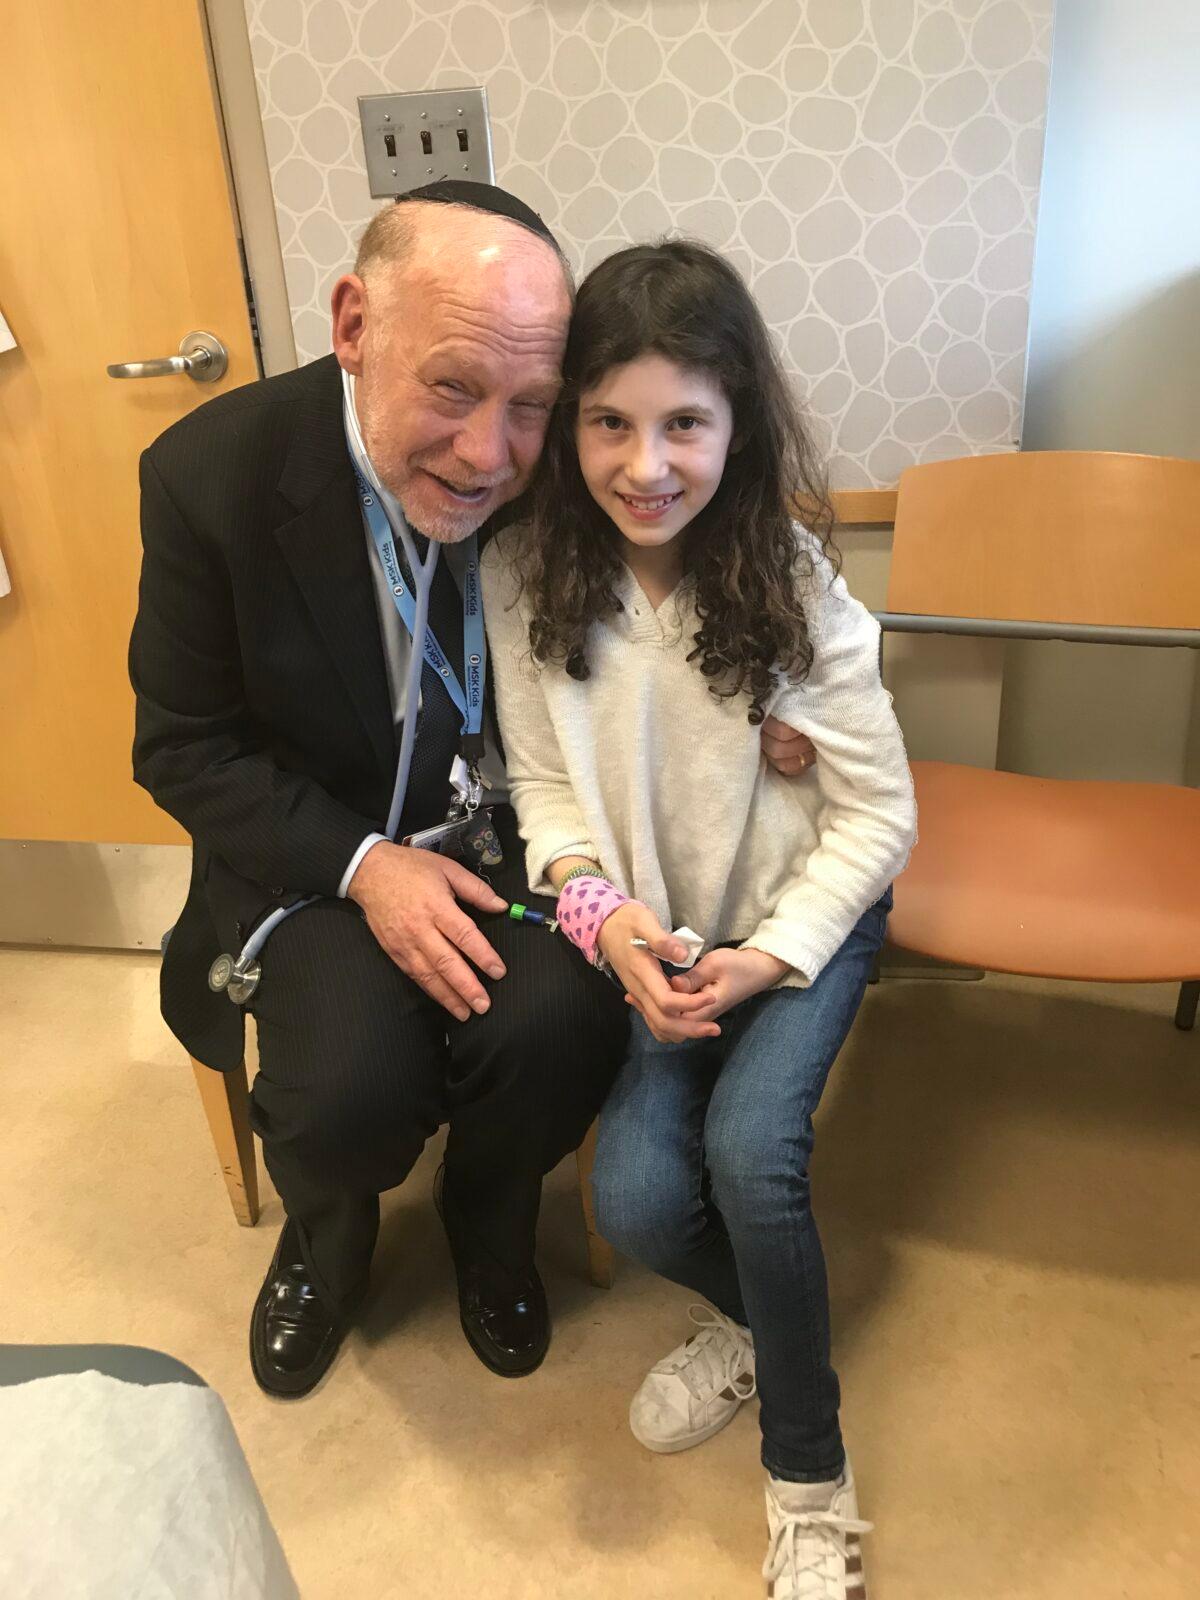 Elana and Dr. Wexler after her recovery from cancer. (Courtesy of Rena Koenig)